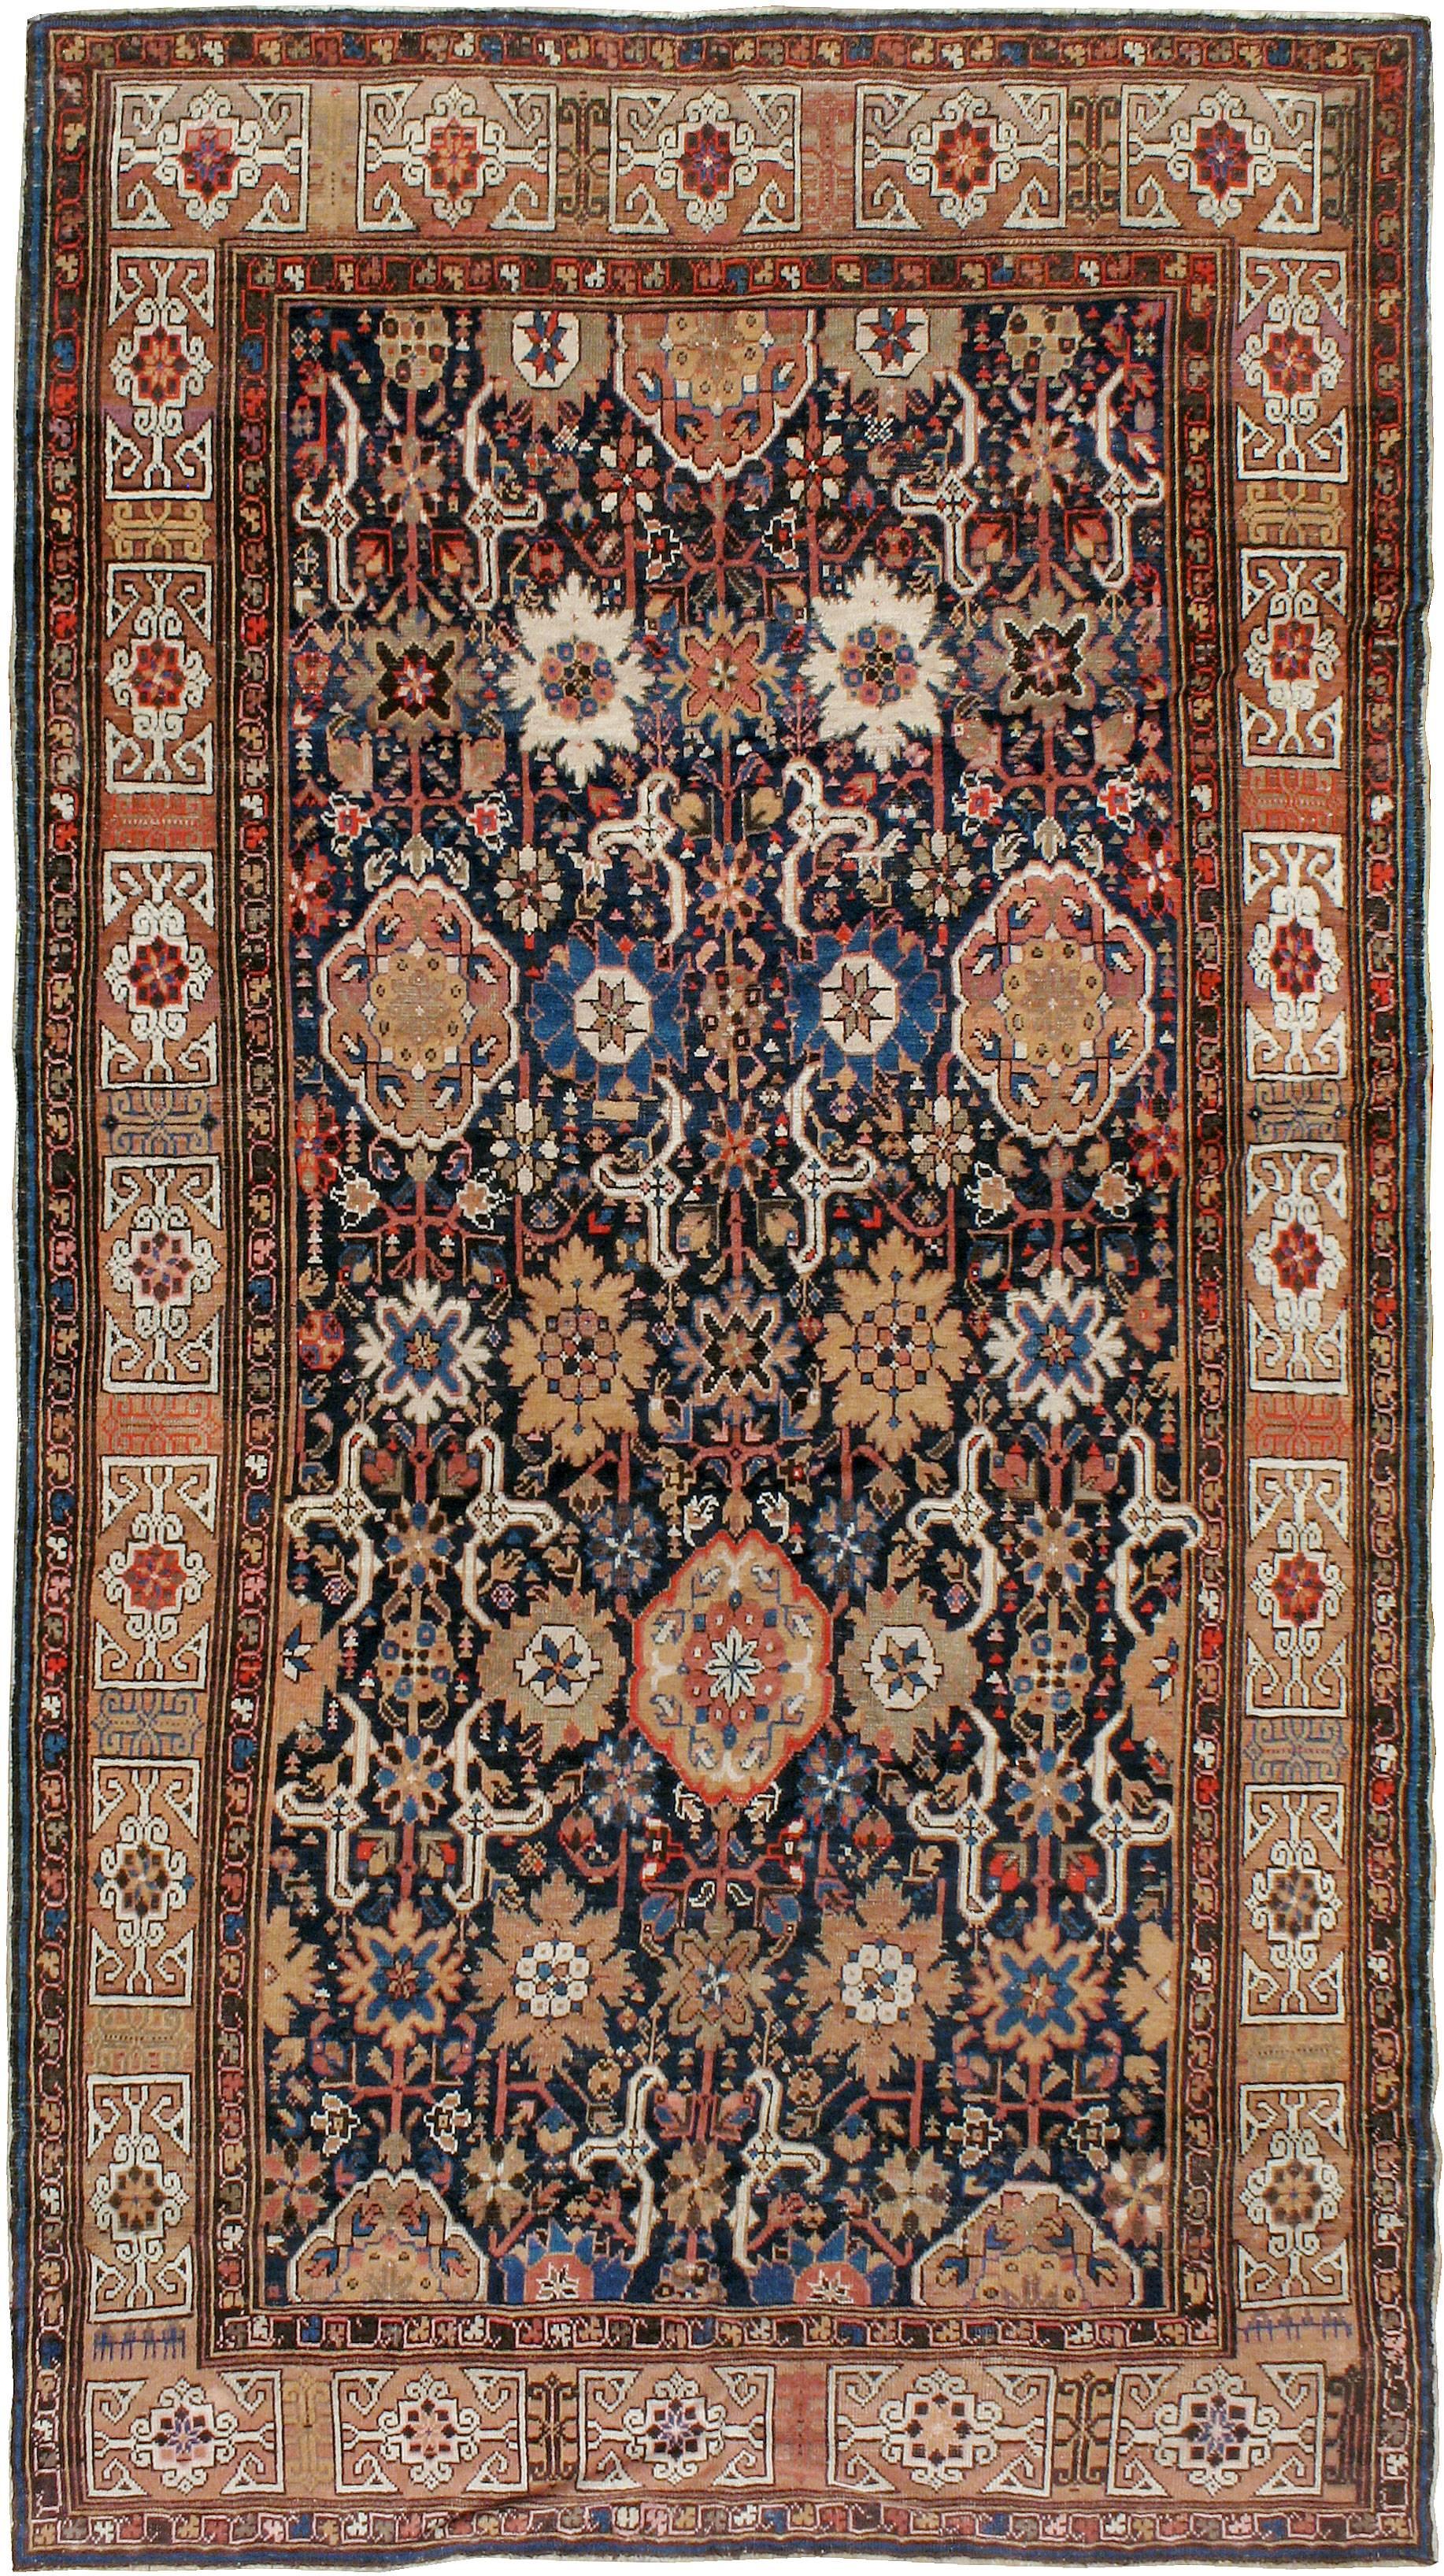 An antique Persian North West gallery carpet from the first quarter of the 20th century with a Kuba design.  This Caucasian weaving style featuring the avshan design and Kufic border derived from the early 18th century.